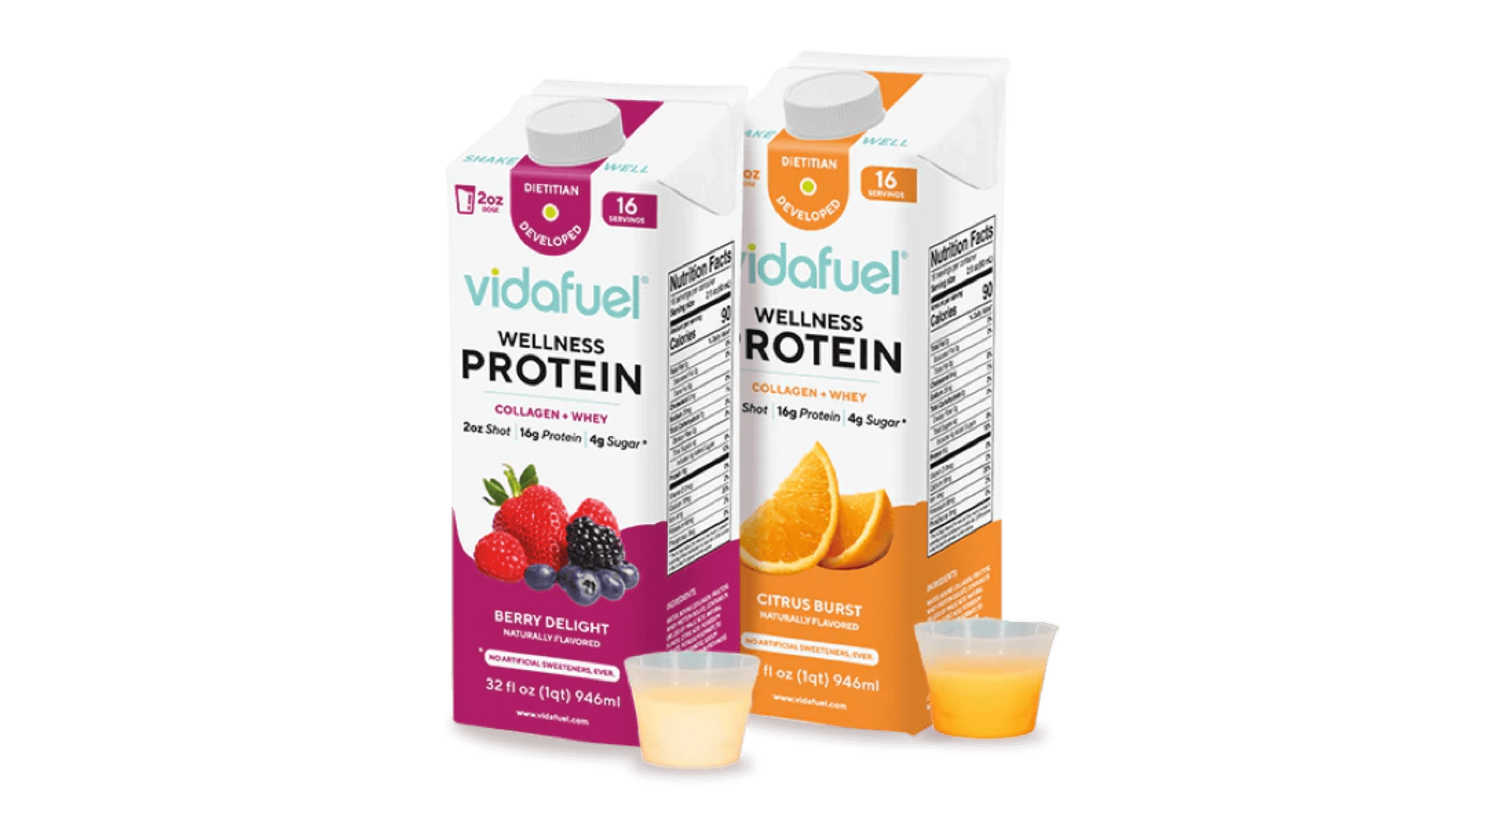 Vidafuel is the first concentrated protein drink that delivers a whopping 17g of high-quality protein in a quick 2oz shot. Developed by dietitians to fit your lifestyle.